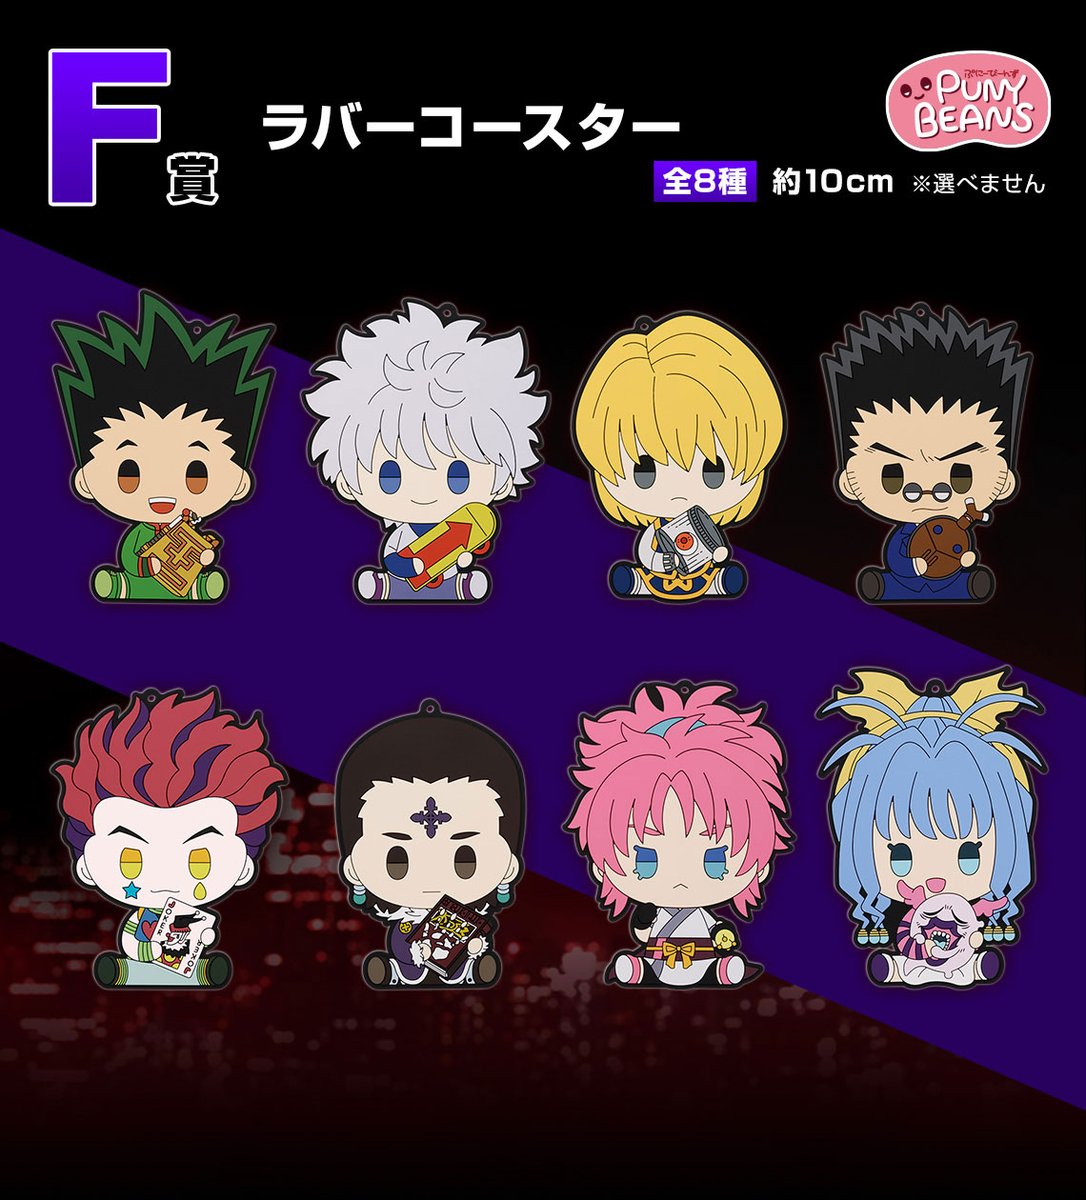 They released more on the other yorknew ichiban kuji and these!!! 😭